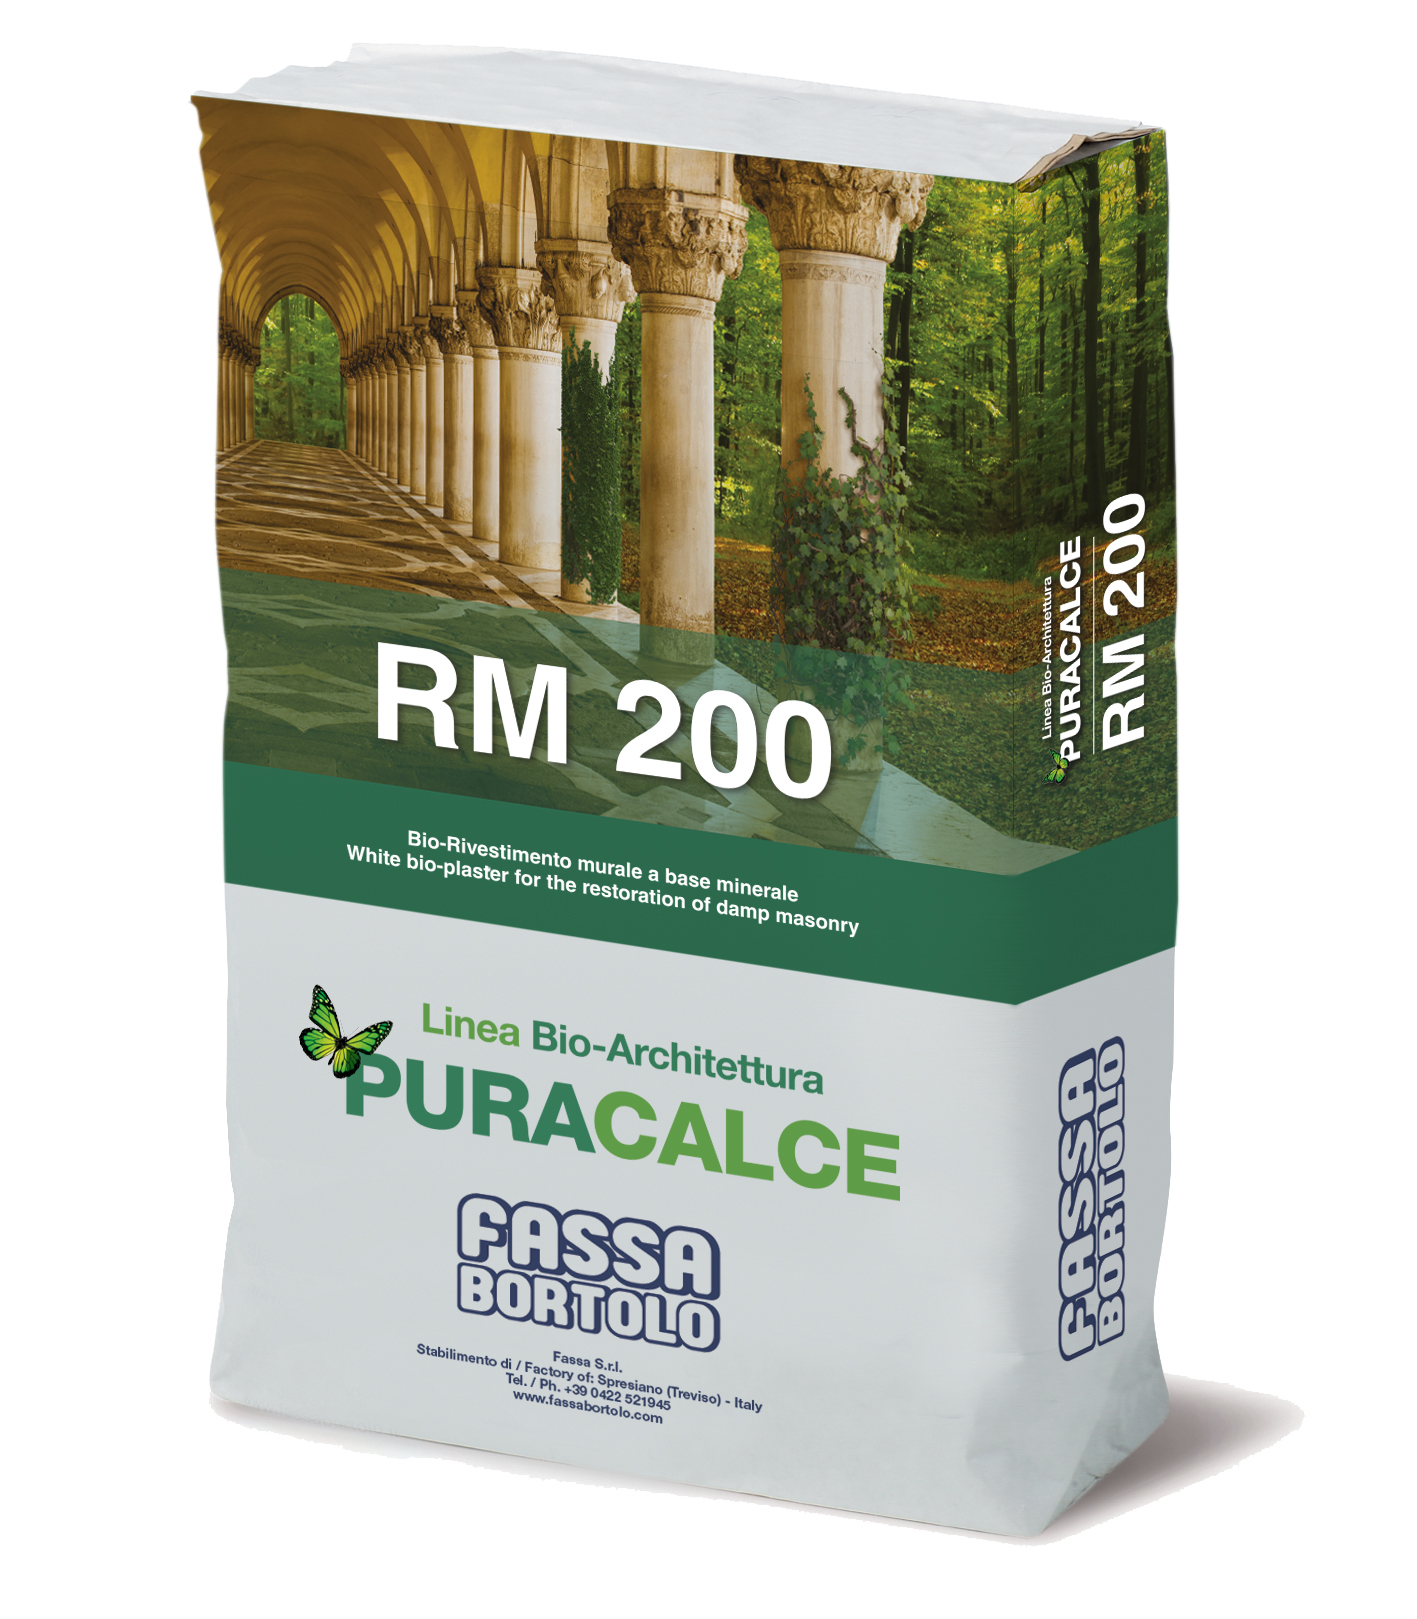 RM 200: Bio white mineral-based wall coating for exteriors and interiors